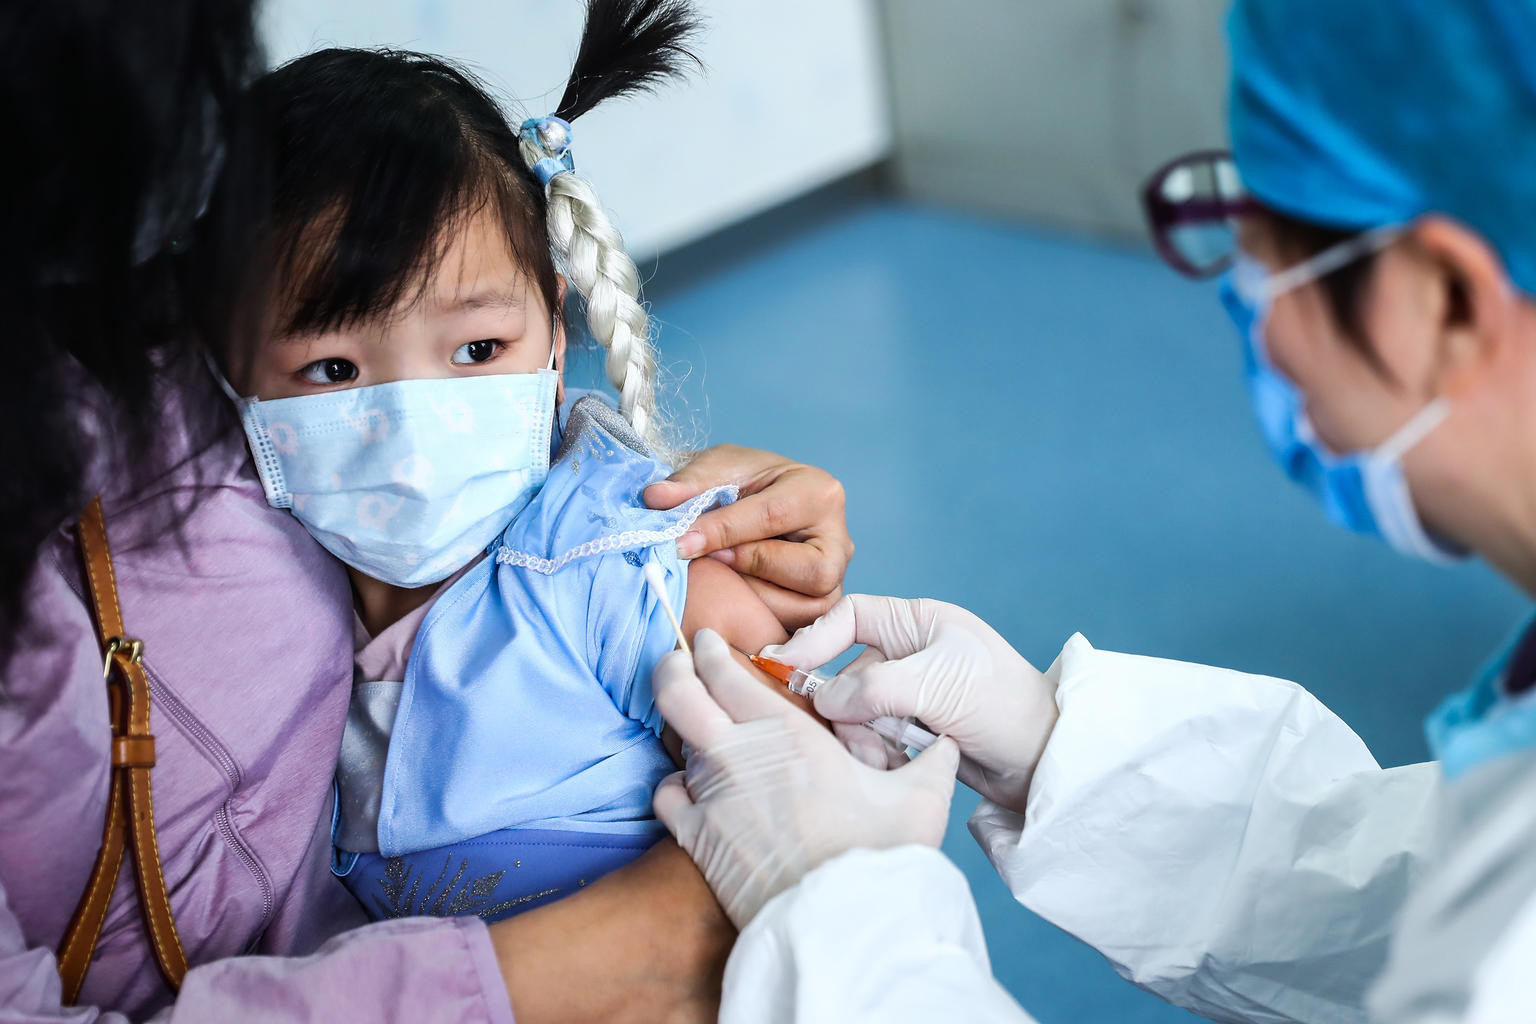 A 3-year-old girl receives a vaccine shot at a community health centre in Beijing, China, on 26 March 2020. Provinces other than Hubei, the epicenter of the COVID-19 outbreak, gradually resumed full vaccination services that had been halted due to the outbreak.